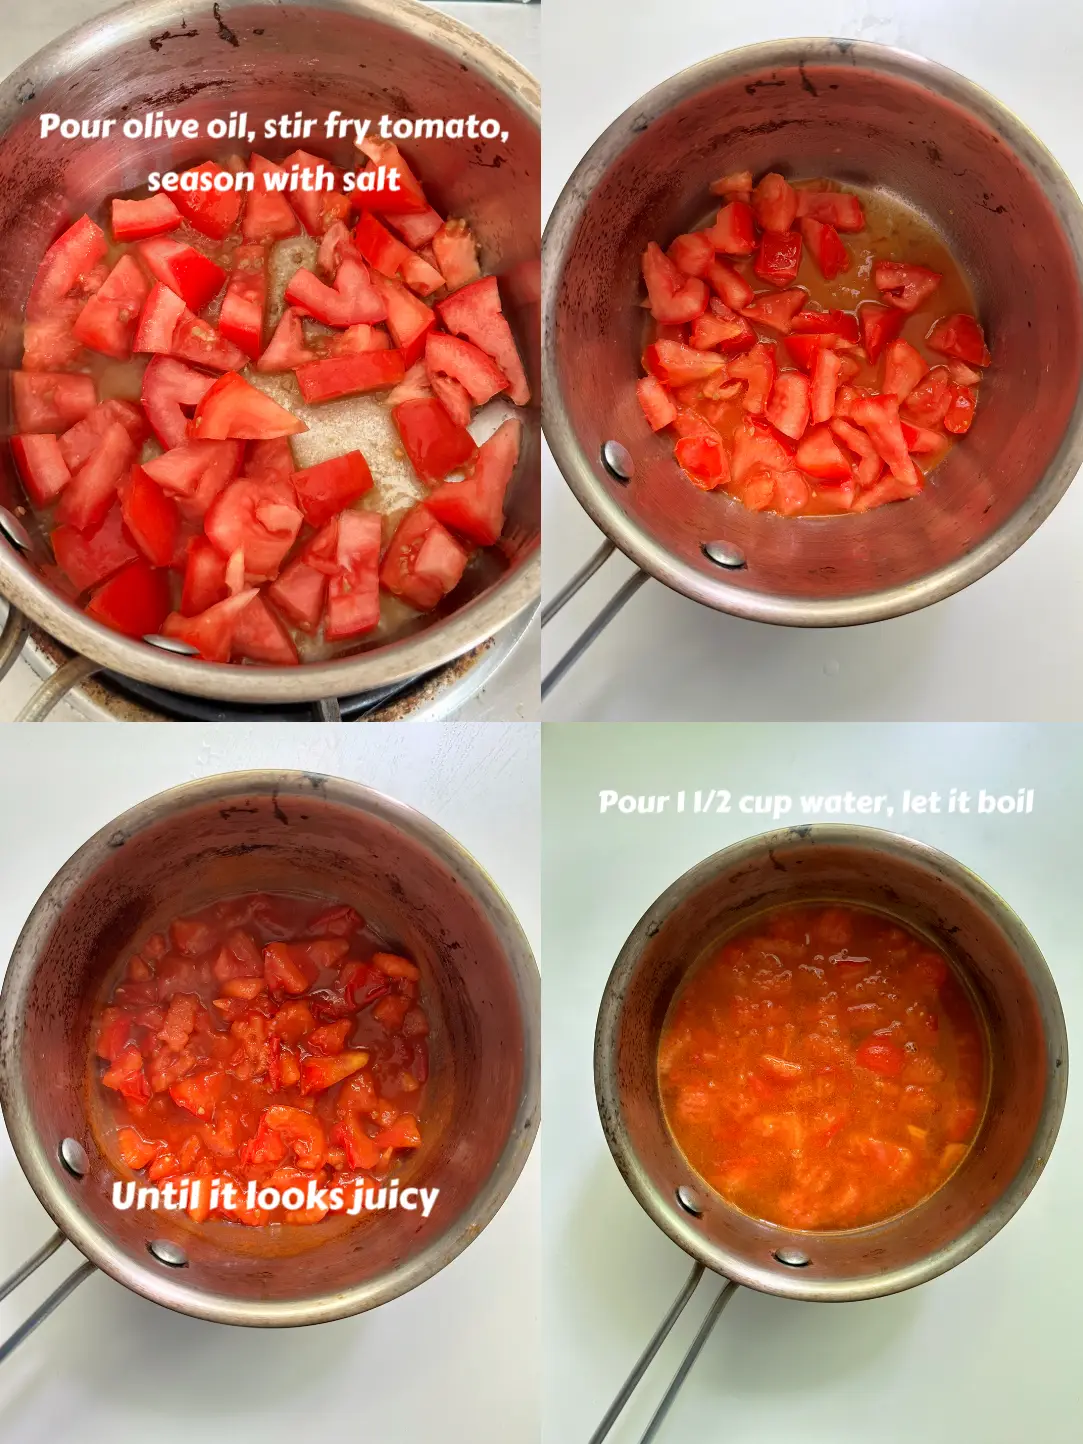 Easy yummy healthy tomato recipe (6 ingredients)'s images(2)